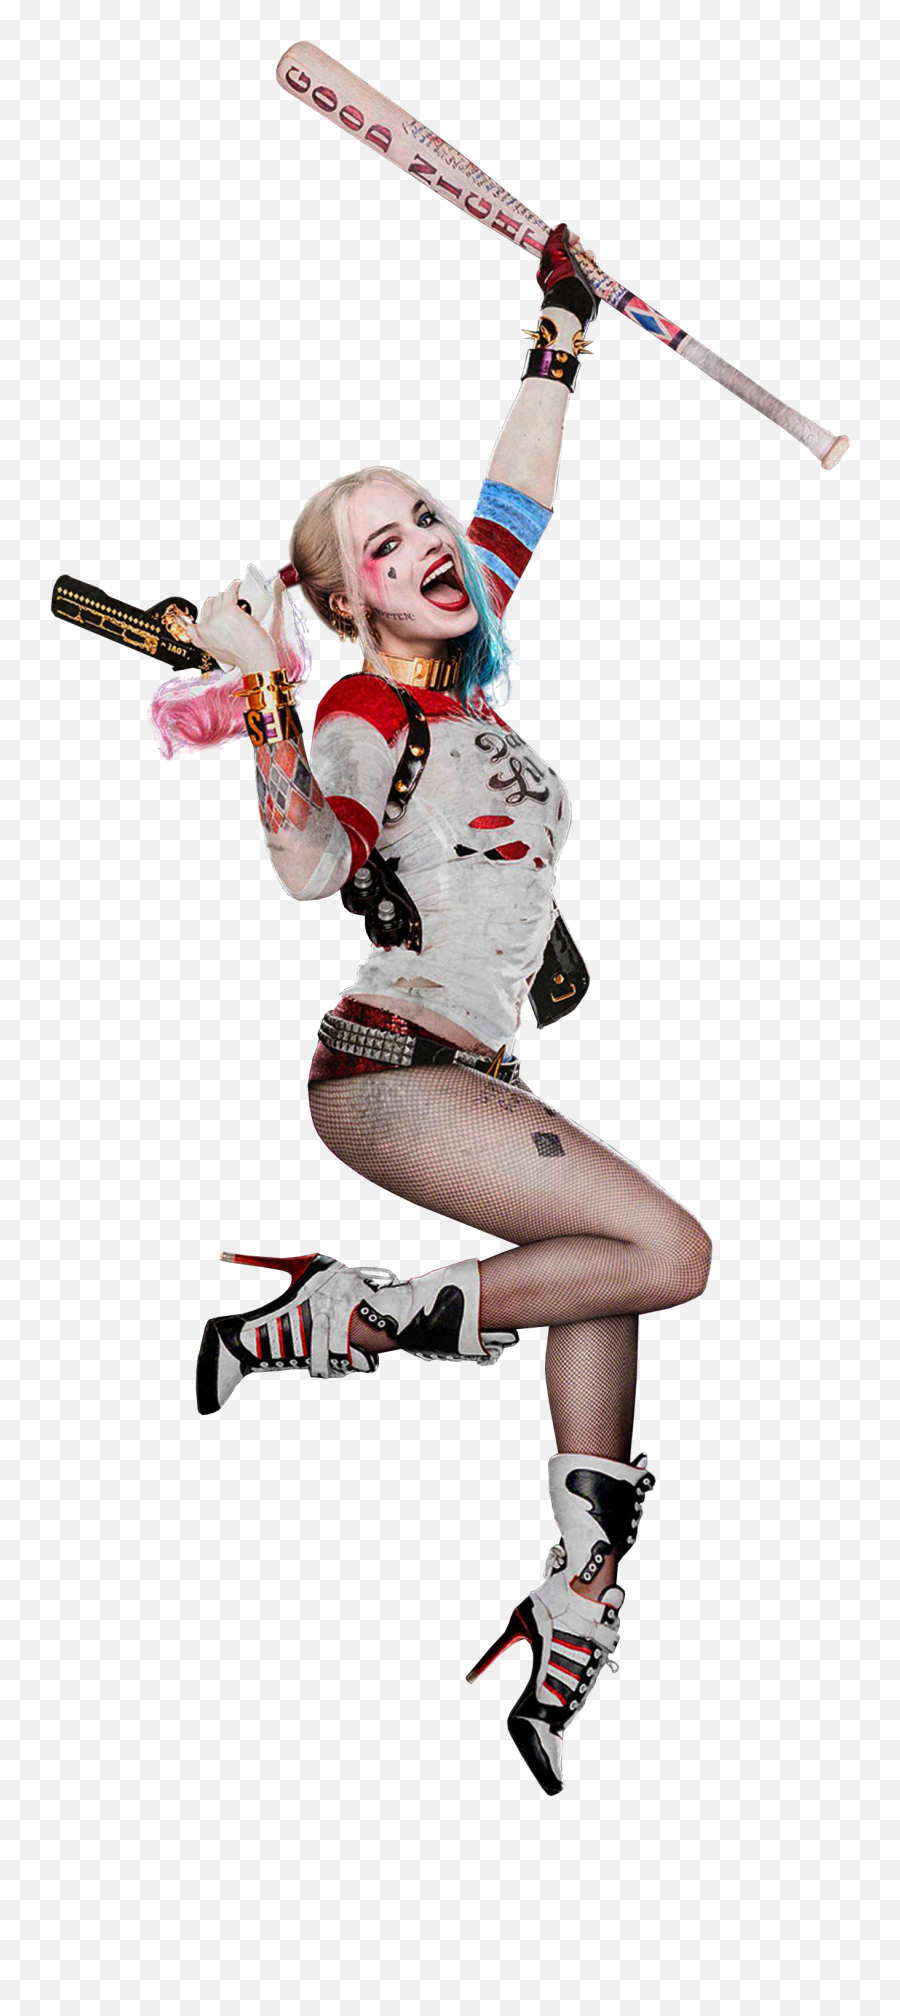 Harley Quinn Suicide Squad Png Image - Png Image Harley Quinn Png Emoji,Harley Quinn Png